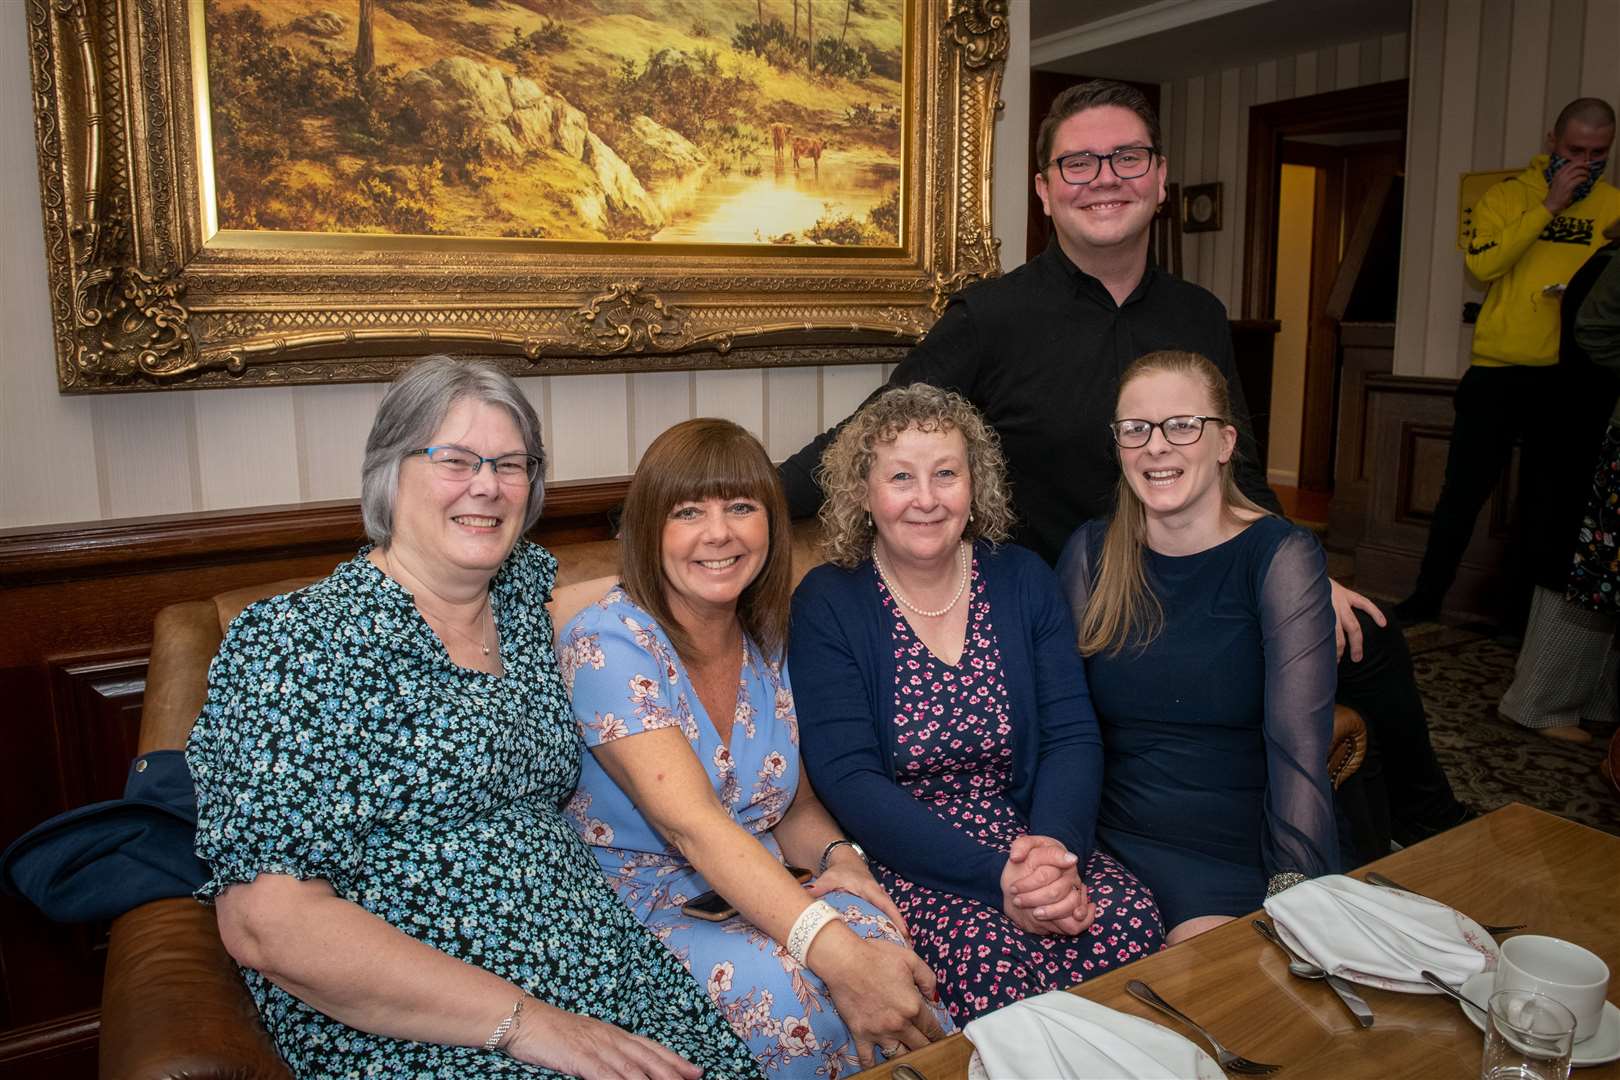 James Mackenzie's Strictly Inverness Afternoon Tea Fundraiser at Drumossie Hotel in Inverness. From left, Heather Train, Clare Humphreys, Karen Duncan, Jo Mackenzie and Darrel Paterson.